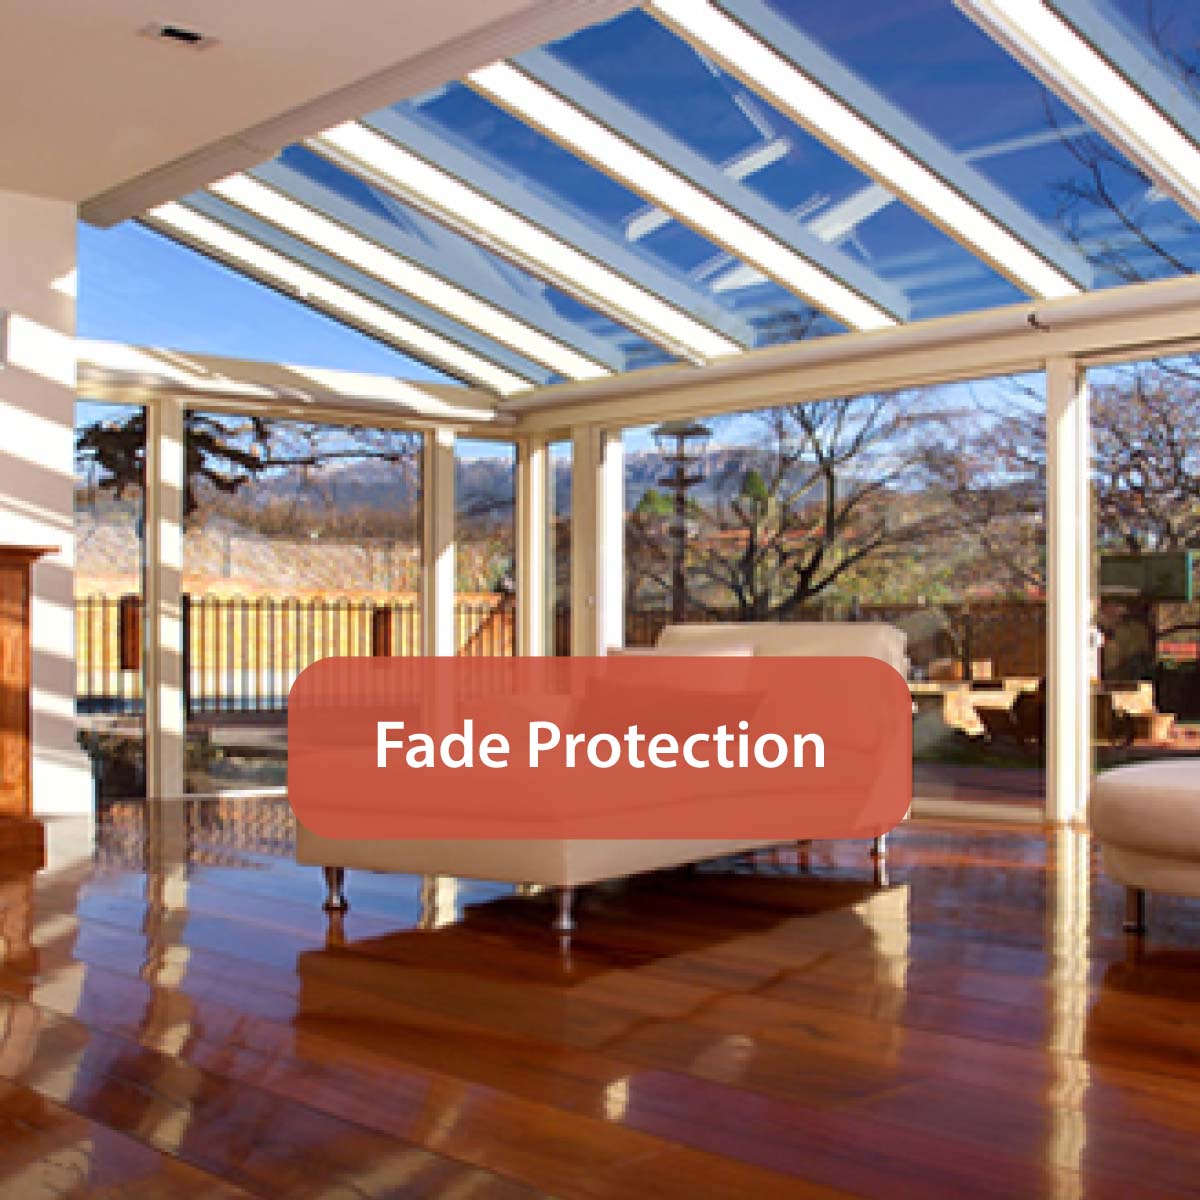 Fade Prevention Window Film Protects Your Norman Home From the Sun!